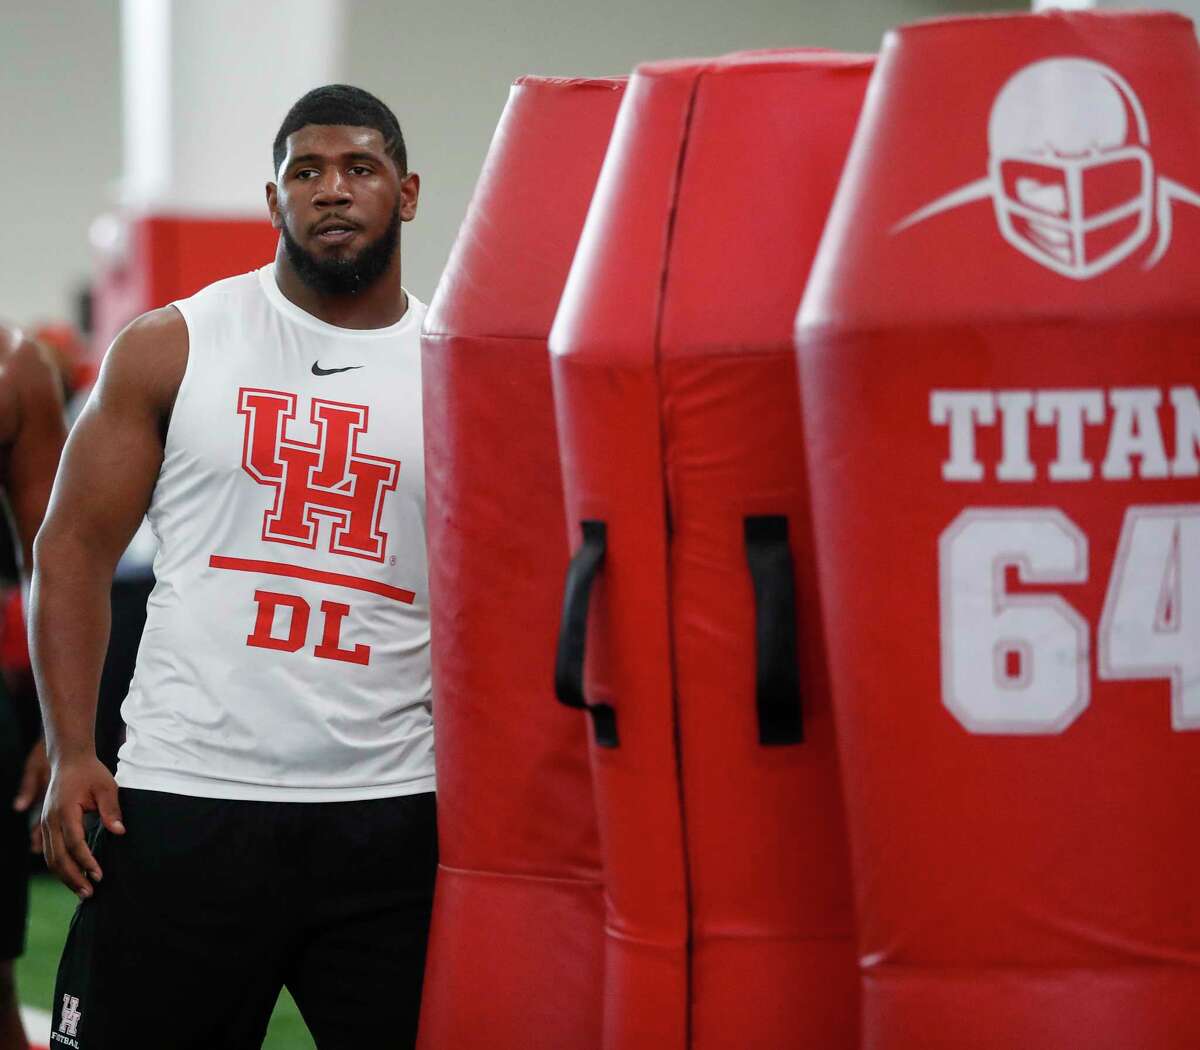 Ed Oliver participates in position skill work at the University of Houston Pro Day at UH's Indoor Practice Facility, Thursday, March 28, 2019, in Houston.